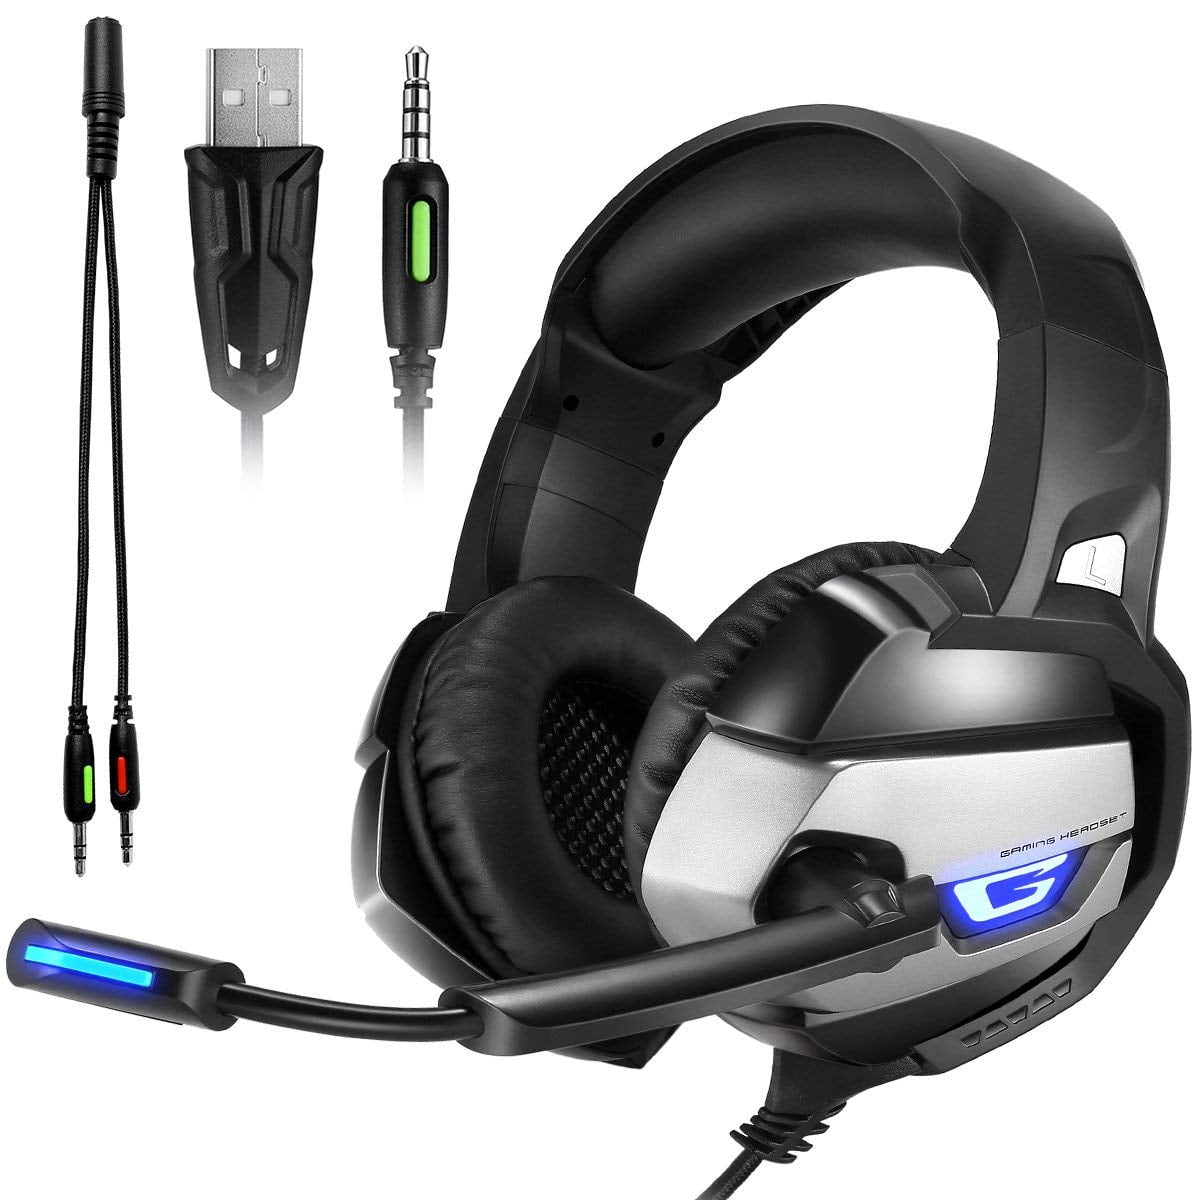 PS4 Xbox One Gaming Headset, OMIKUMA K5 Over-Ear Gaming Headphones with Mic, Stereo Bass Surround, LED Lights and Volume Control for Laptap, PC, Mac, and Smartphone